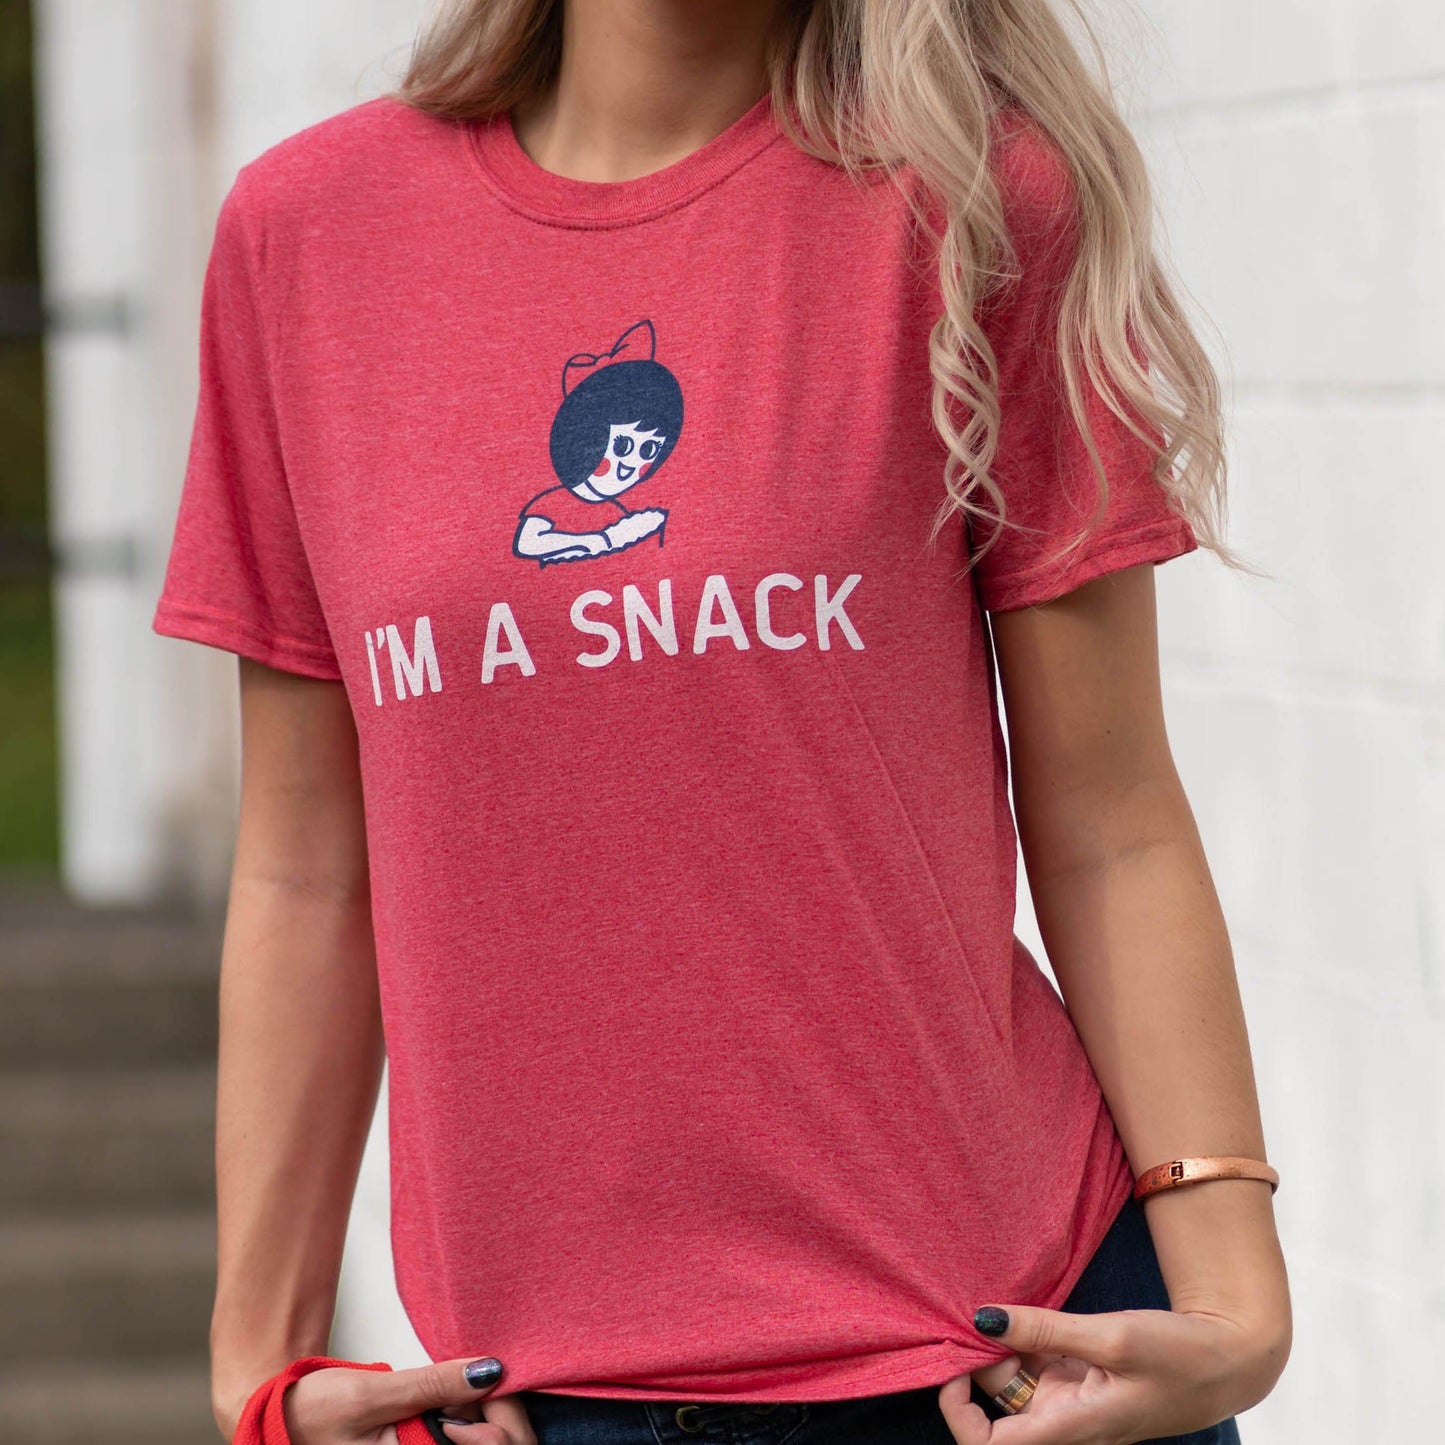 Utz I'm a Snack (Red) / Shirt - Route One Apparel